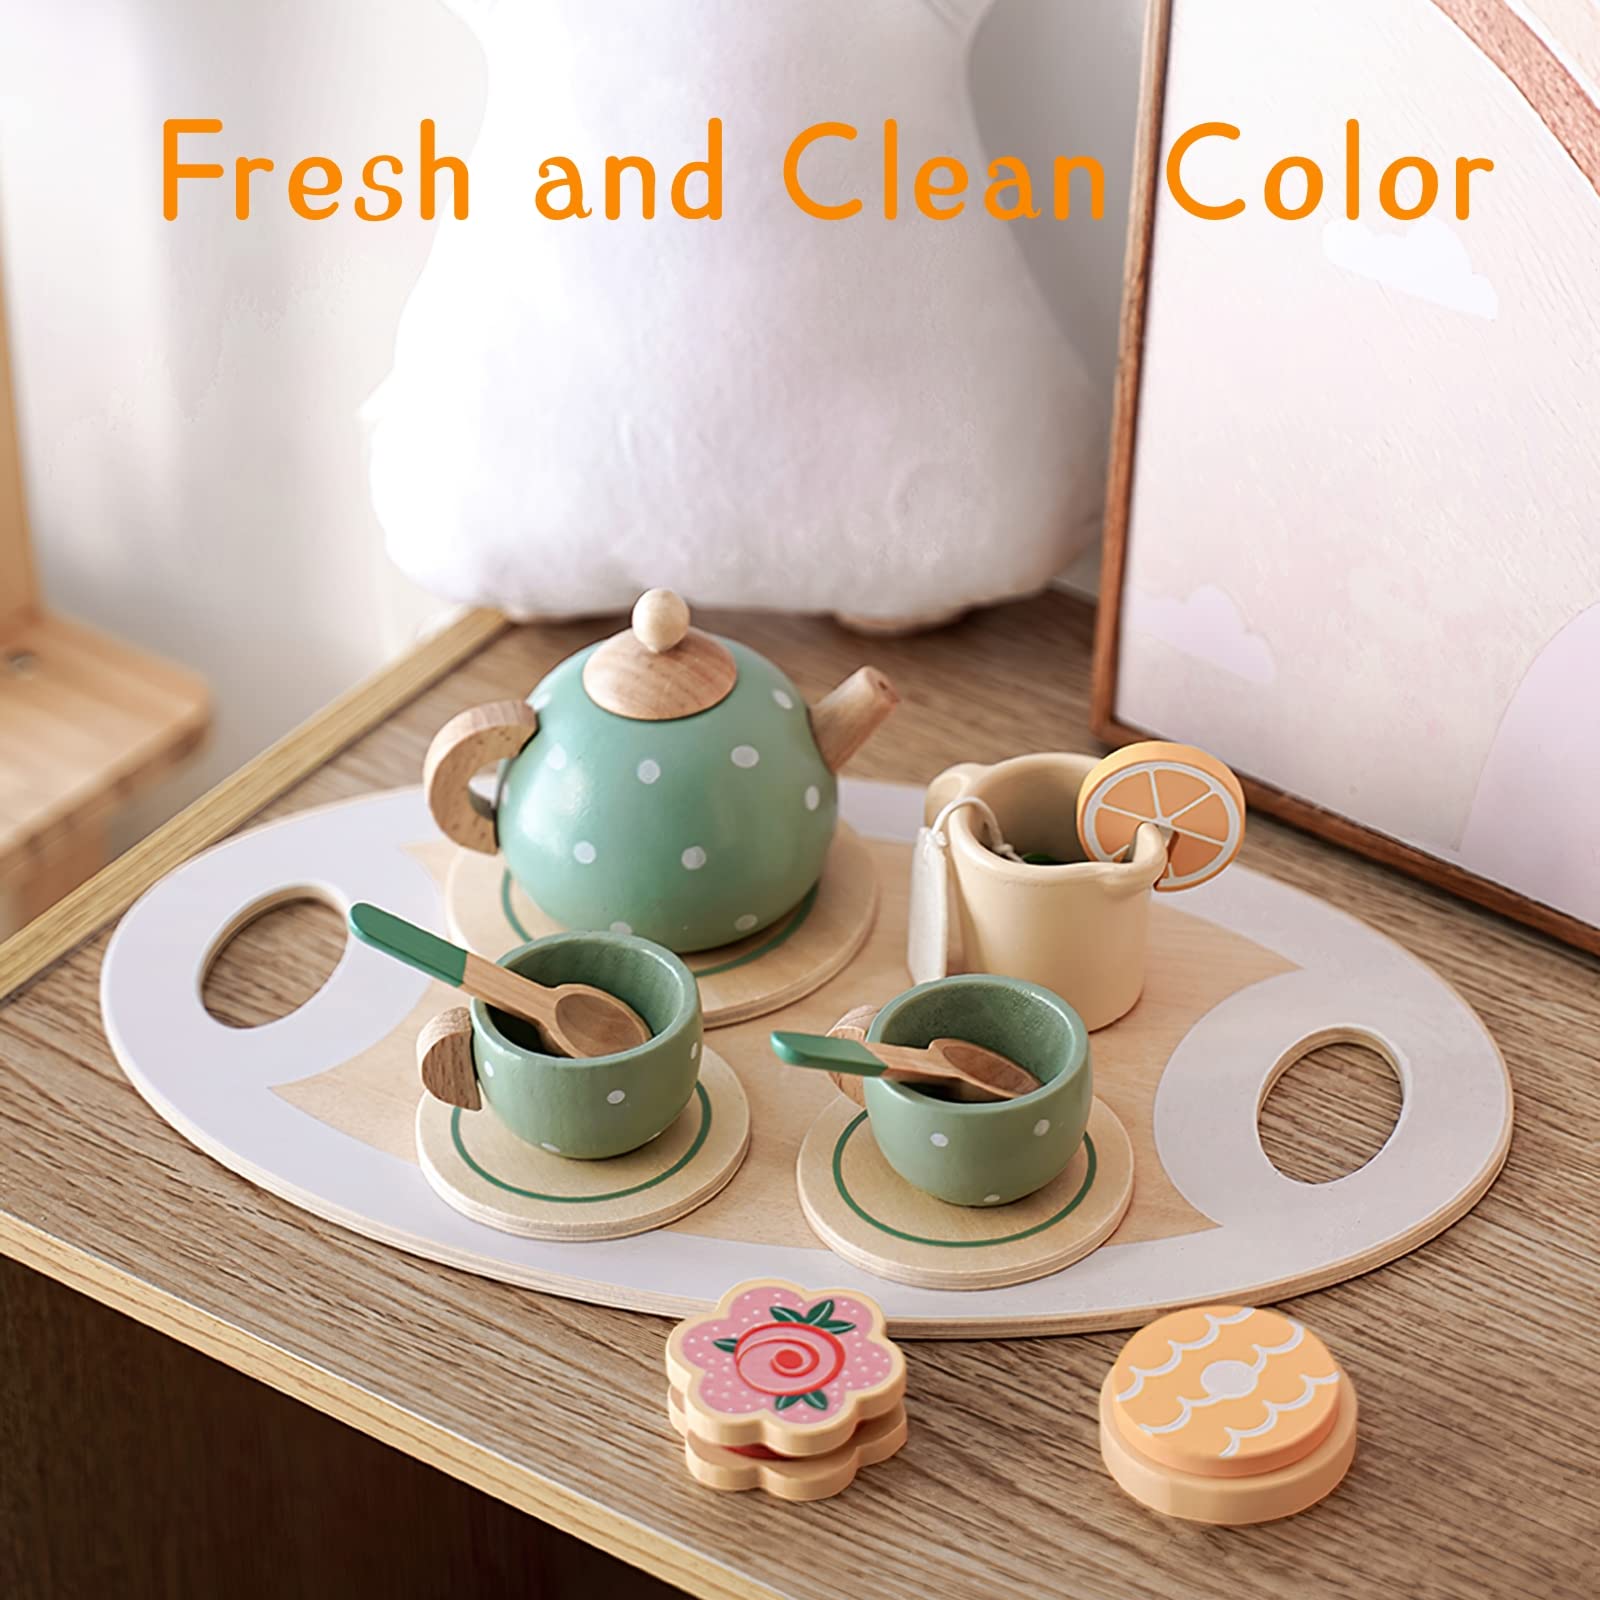 Wooden Tea Party Set for Little Girls Toys, Pretend Play Kids Tea Set for Toddlers Wood Toys, Wooden Play Food Kitchen Accessories Sets for Kid